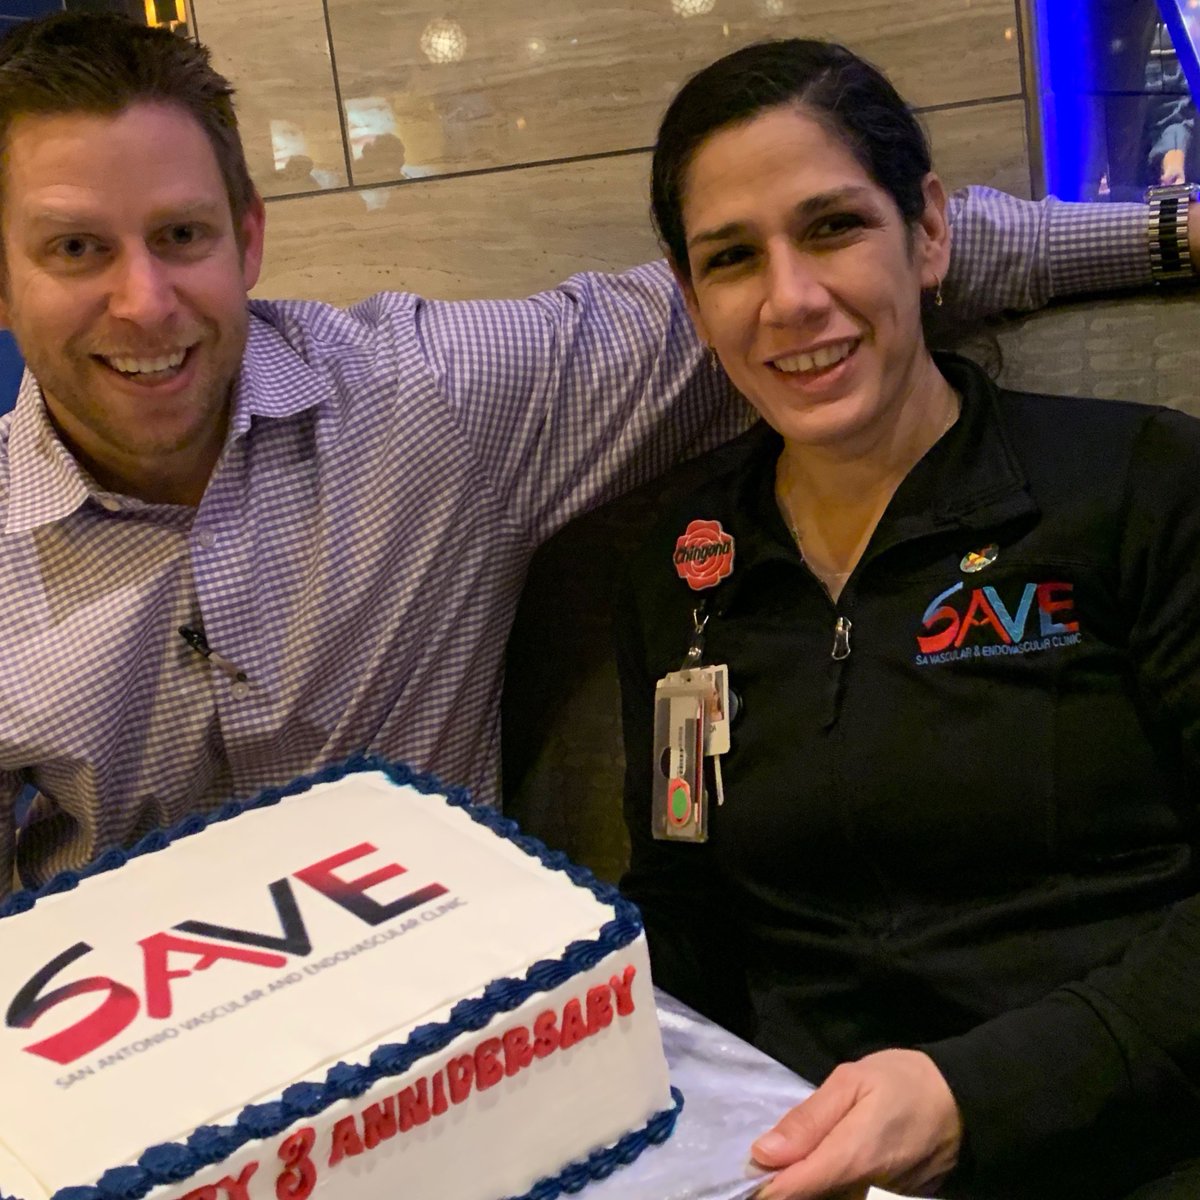 Happy Valentine’s Day Everyone! This weekend SAVE celebrated 3 years of dedication to #AmputationPrevention and fighting #SDoH in the areas that need #CollaborativeCare the most. Thanks to the entire SAVE team for making it all possible! #SAVElimbsSAVElives